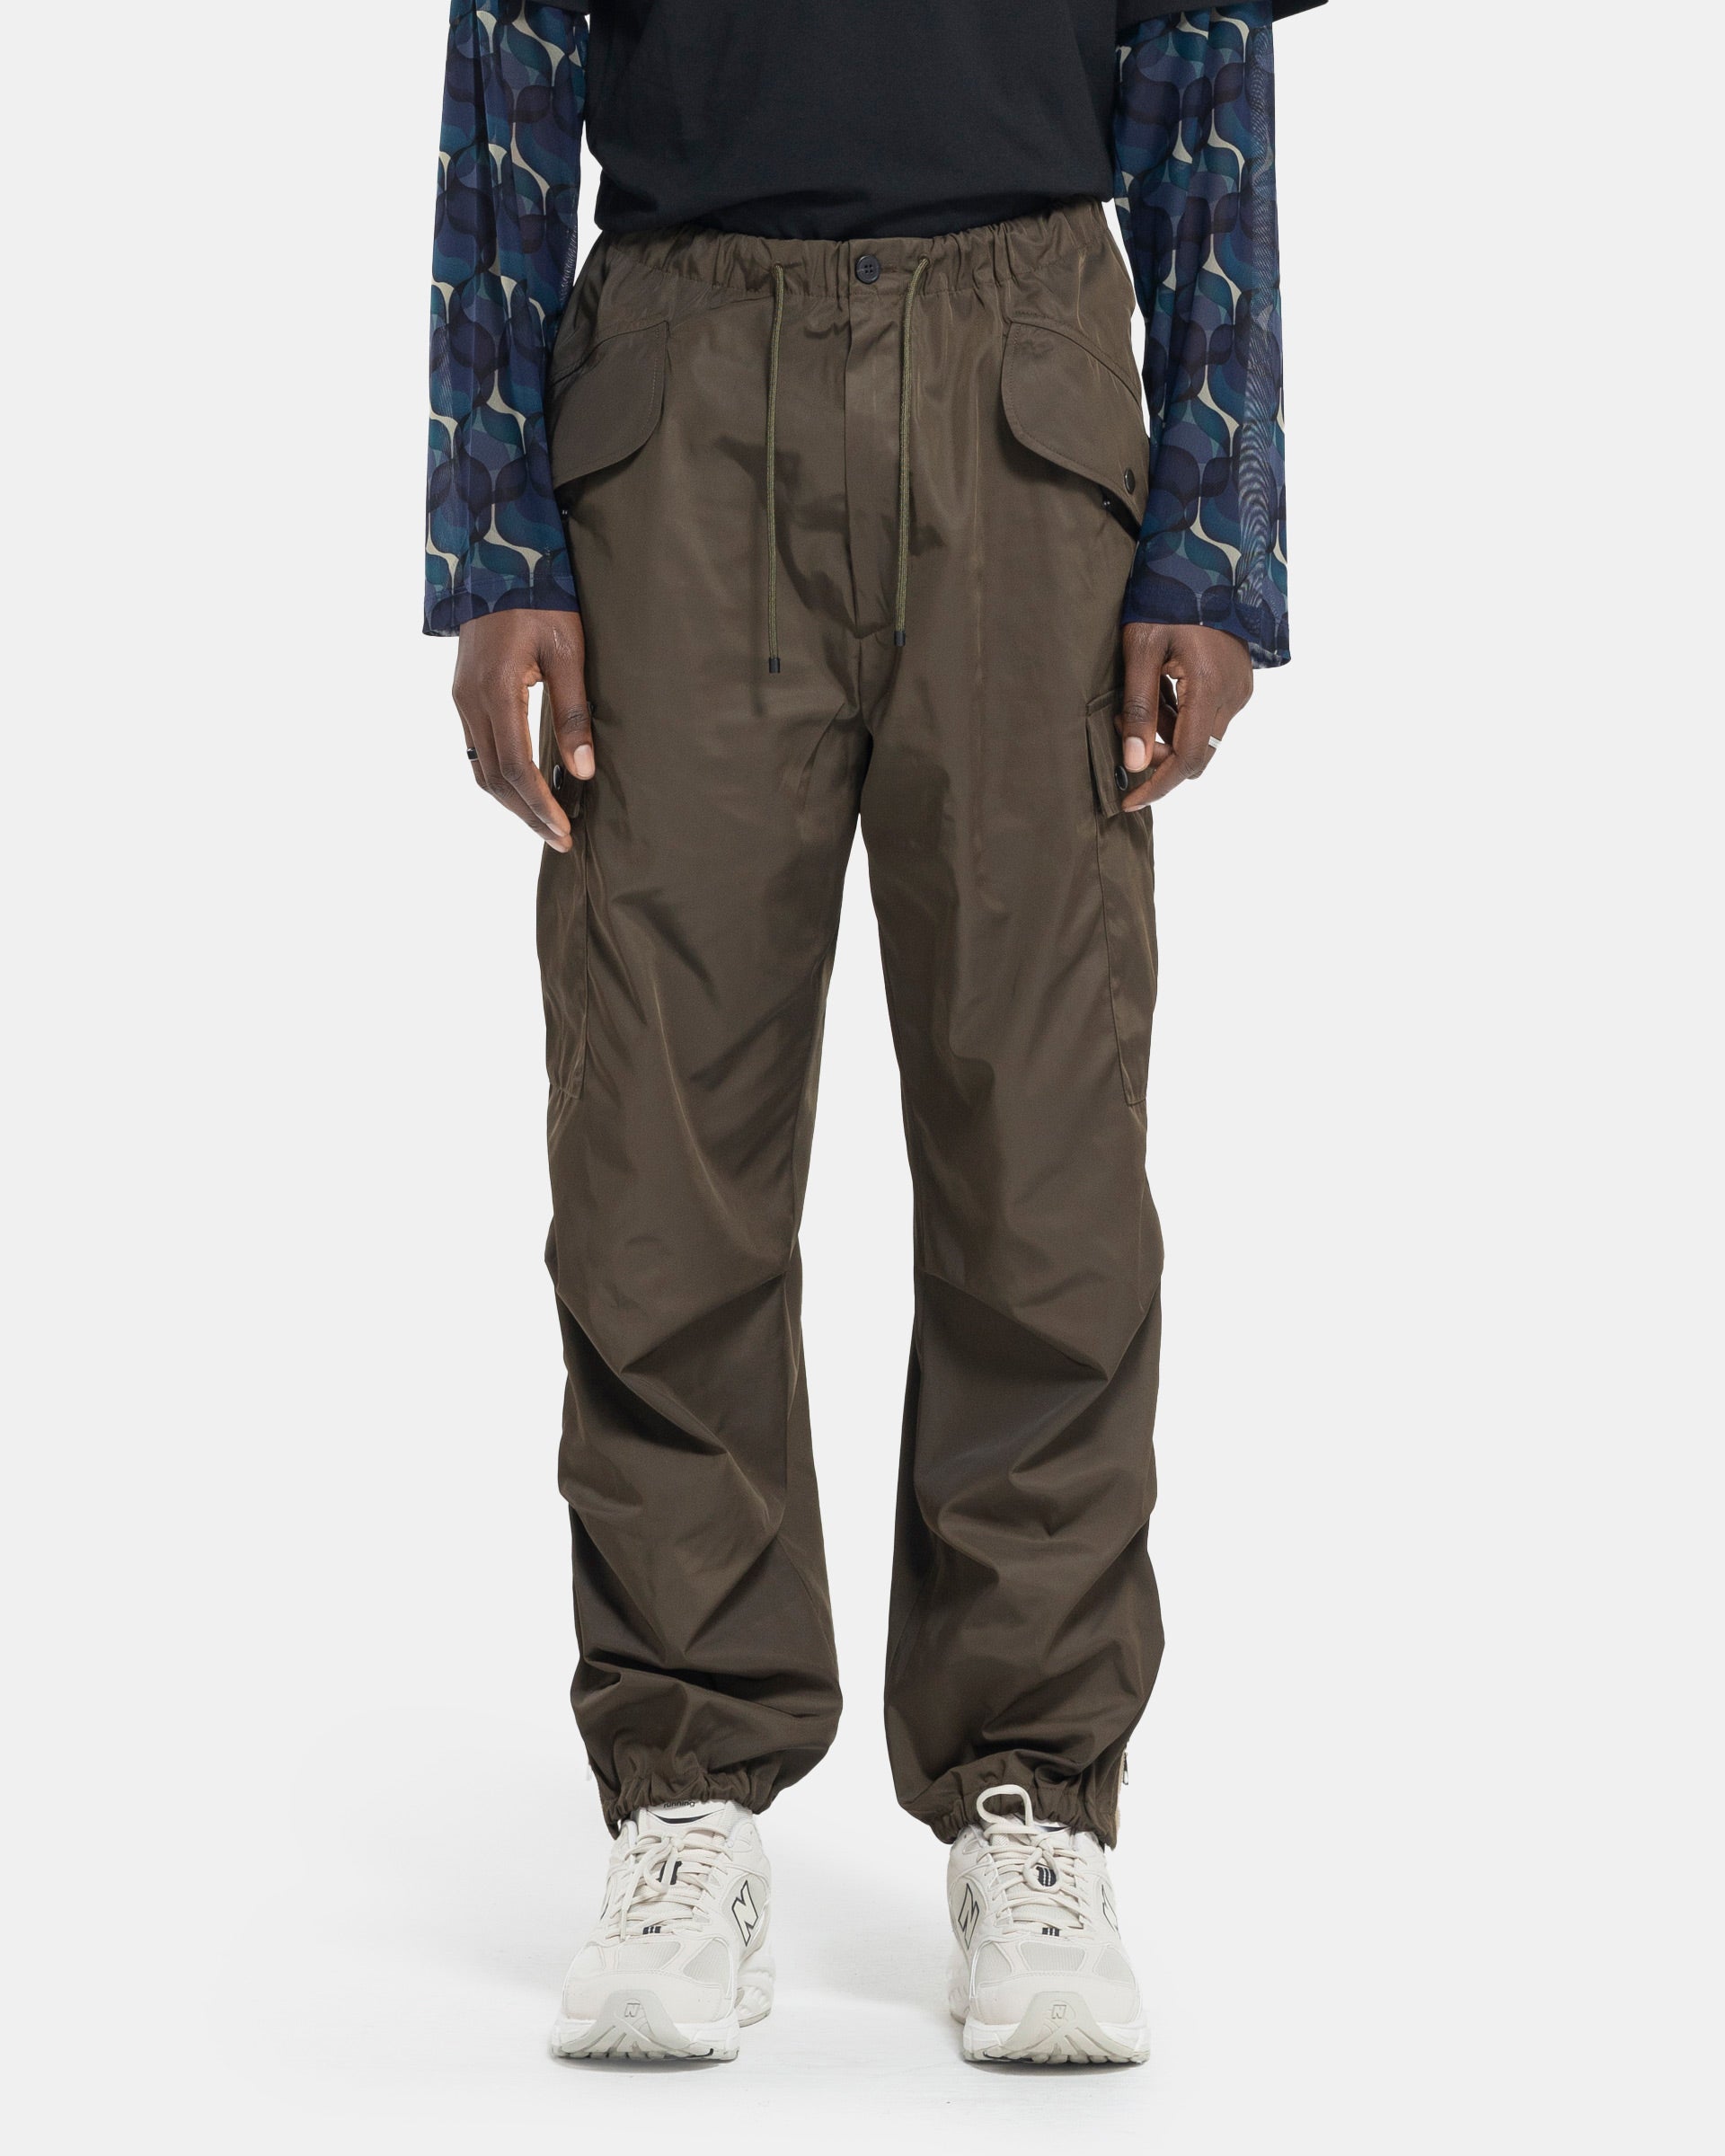 Fae low waist cord cargo pants in sepia brown